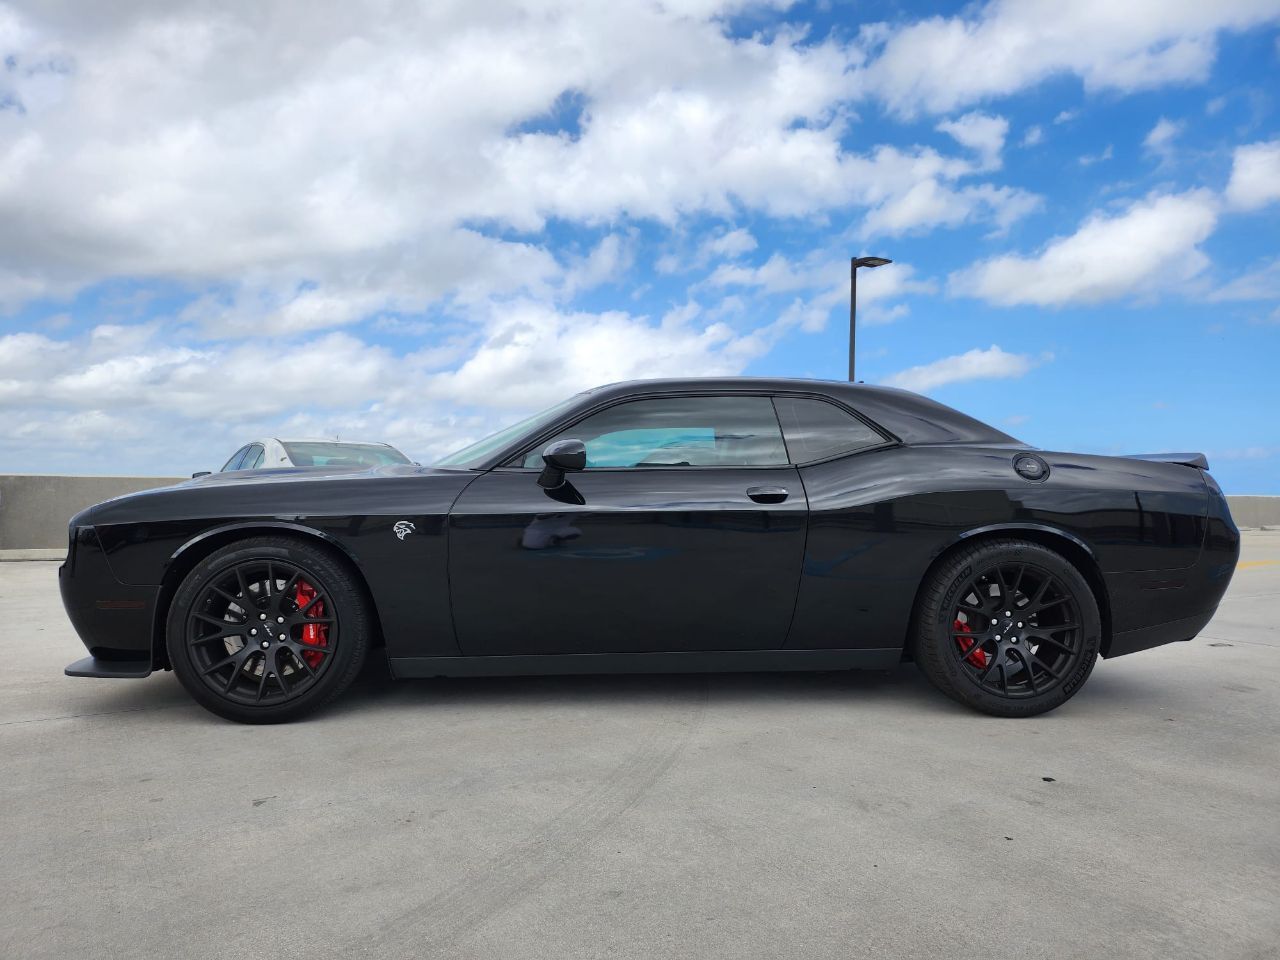 2015 Dodge Challenger Coupe - $39,999